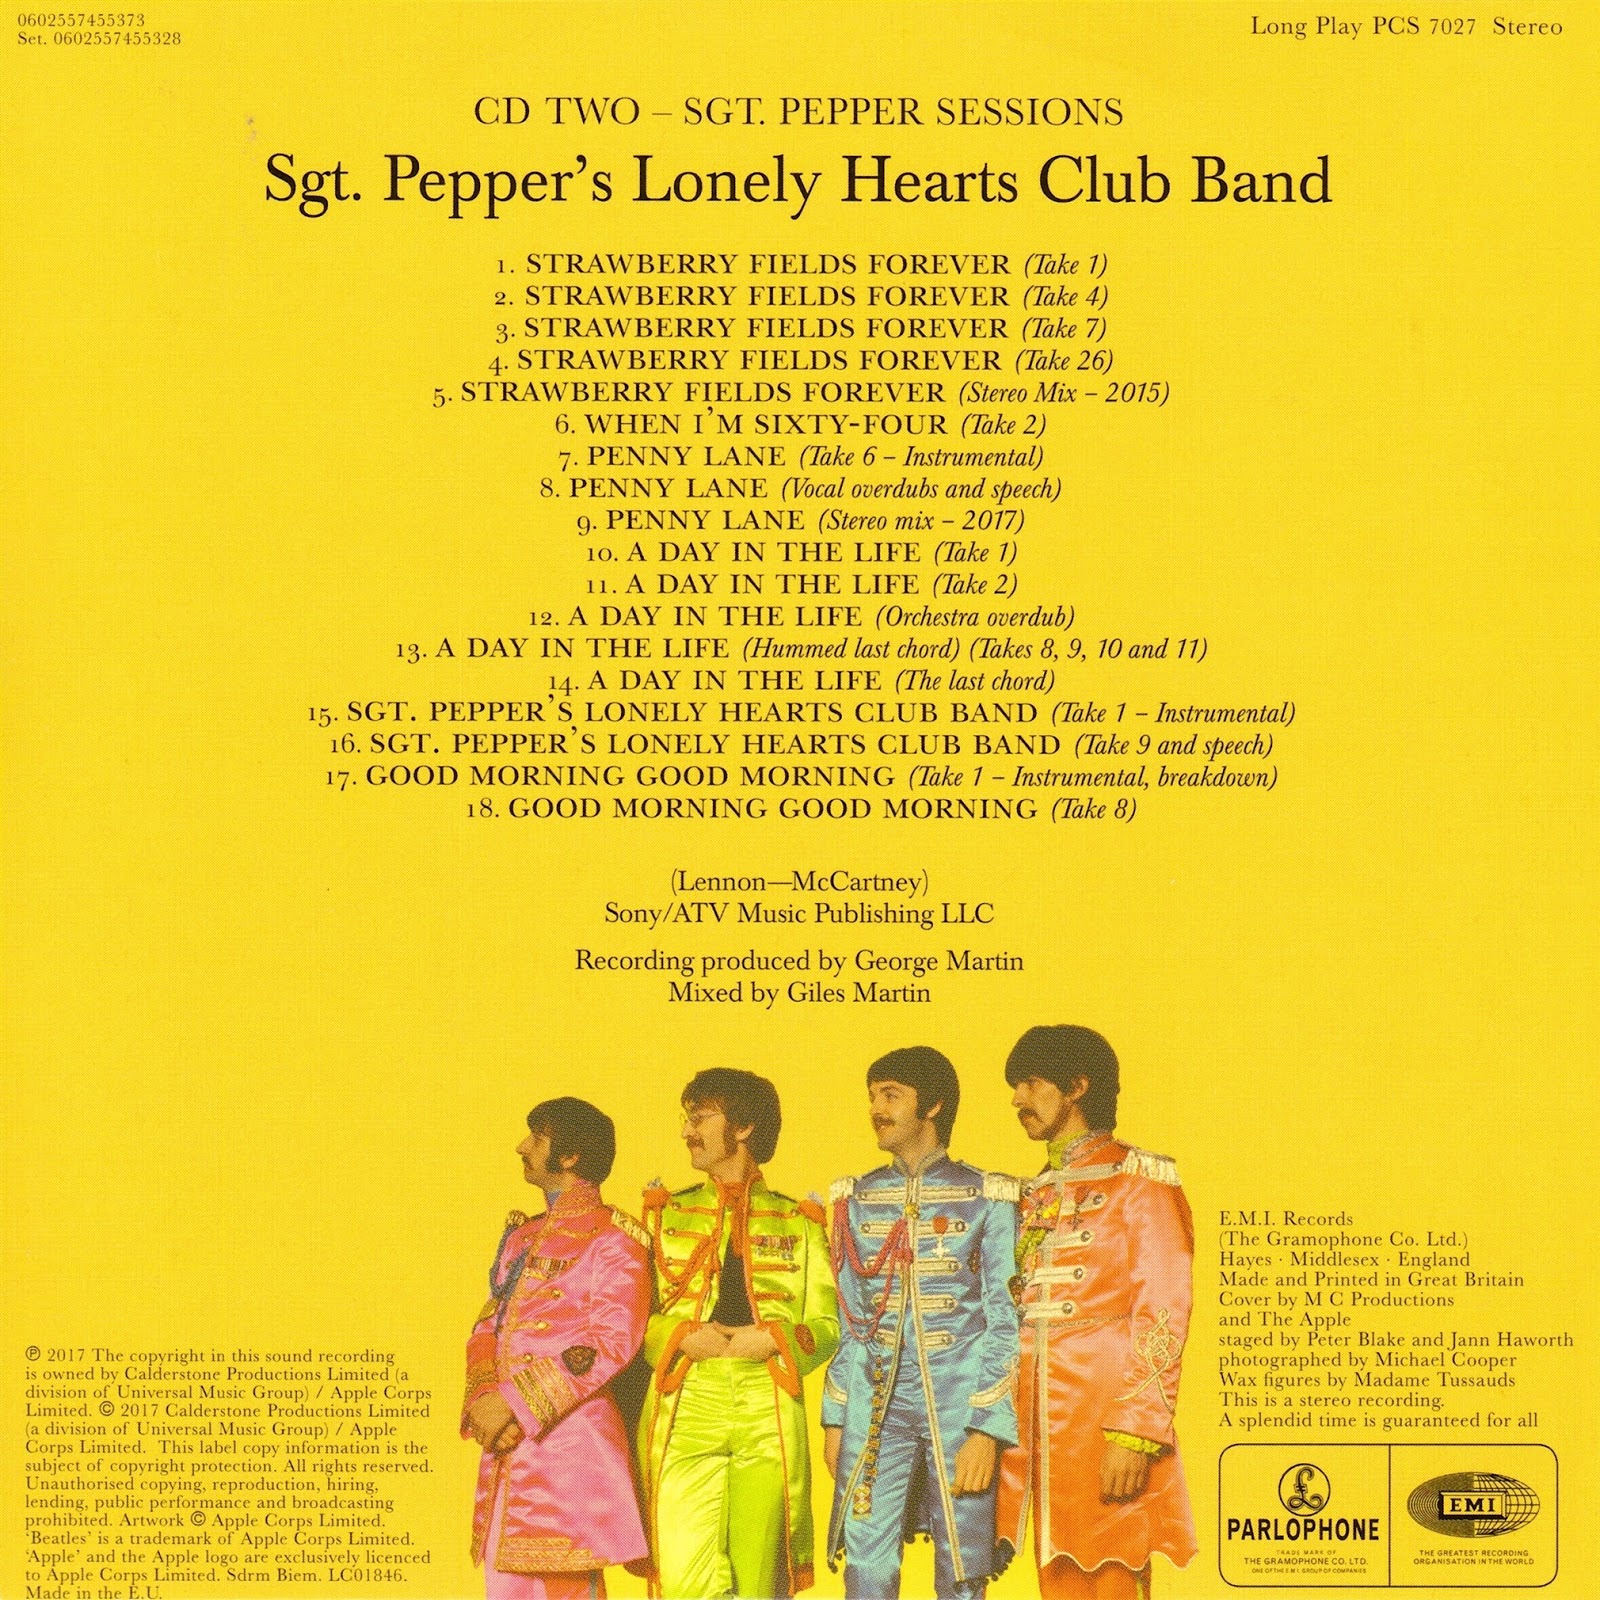 Beatles sgt peppers lonely hearts club. Cover Sgt. Pepper`s Lonely Hearts Club Band (1967). Sgt Pepper's Lonely Hearts Club Band album Cover. Beatles Sergeant Pepper's Lonely Hearts Club Band. Битлз Sgt Pepper s Lonely Hearts Club Band.